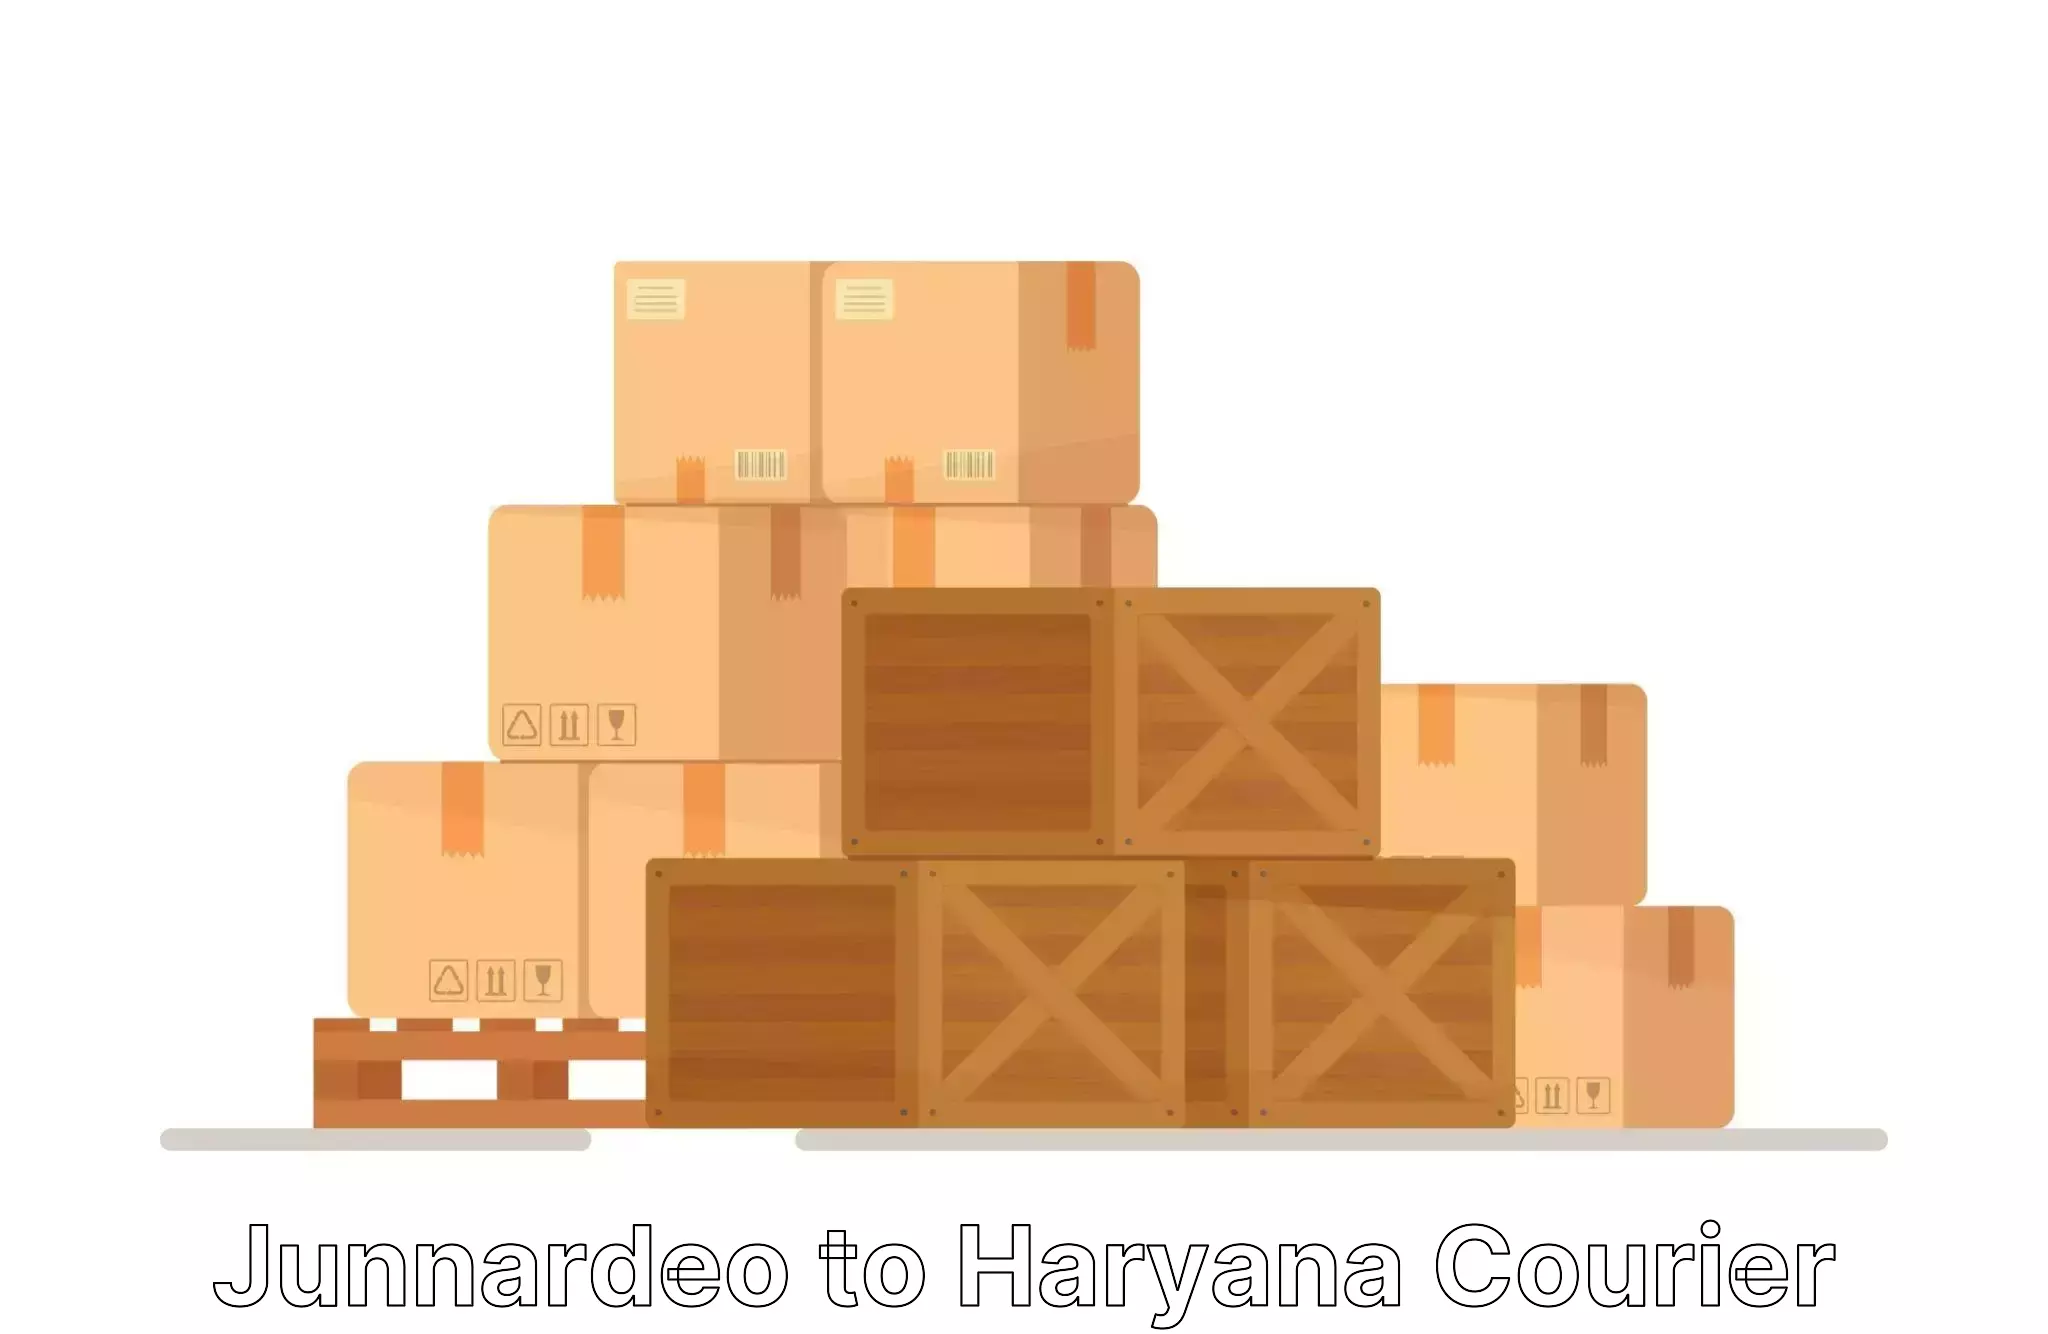 High-quality moving services in Junnardeo to Chandi Rohtak